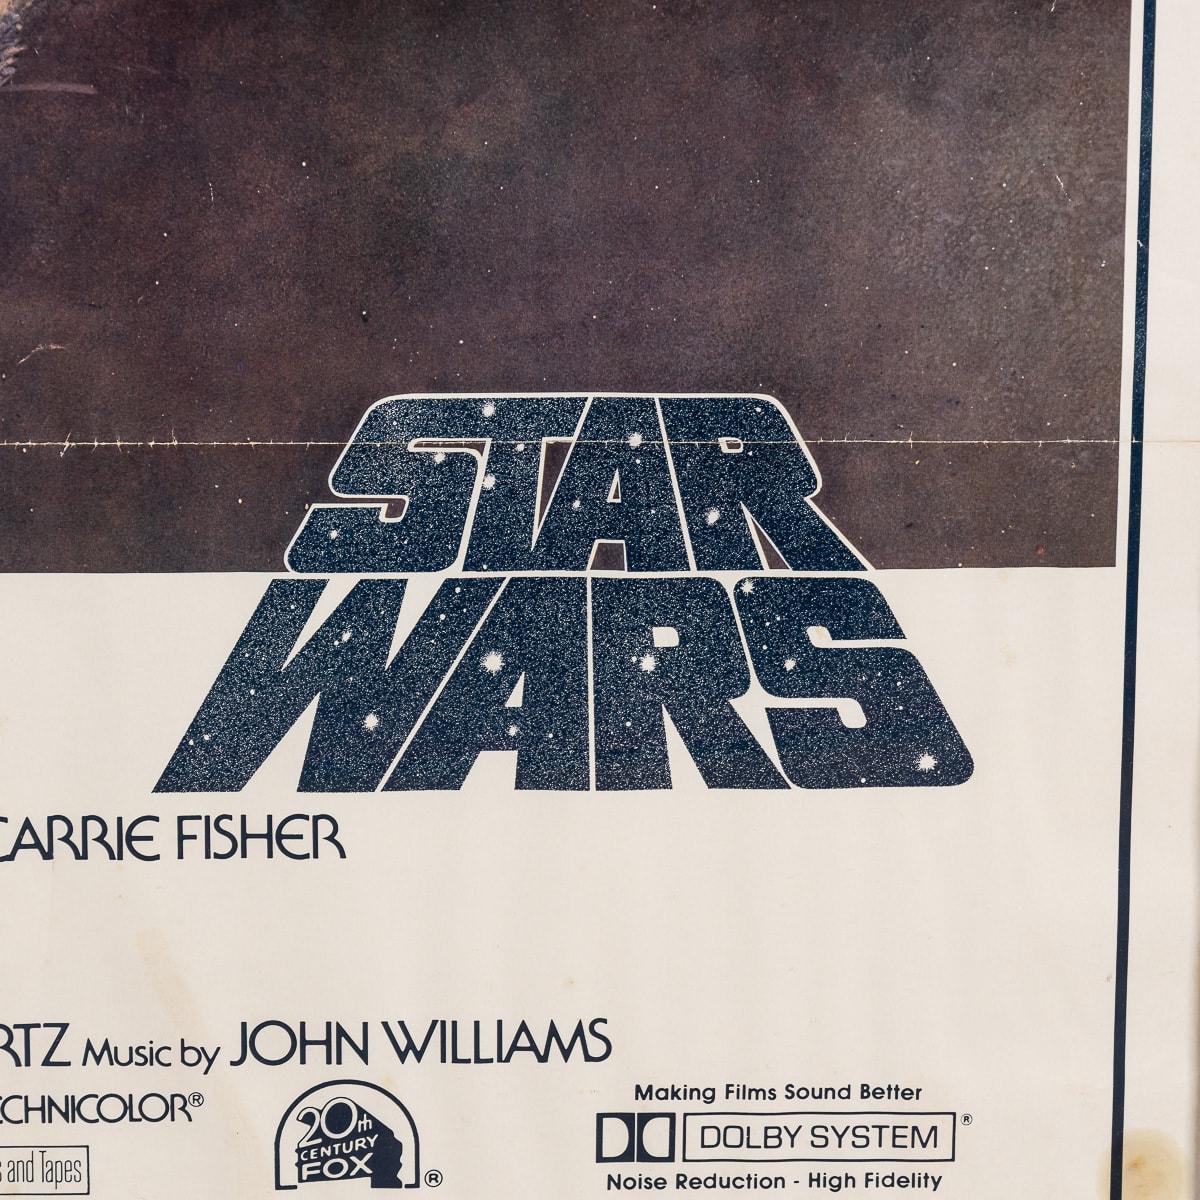 Original U.S. Release Star Wars 'A New Hope' Style A Poster 77/21 c.1977 For Sale 5